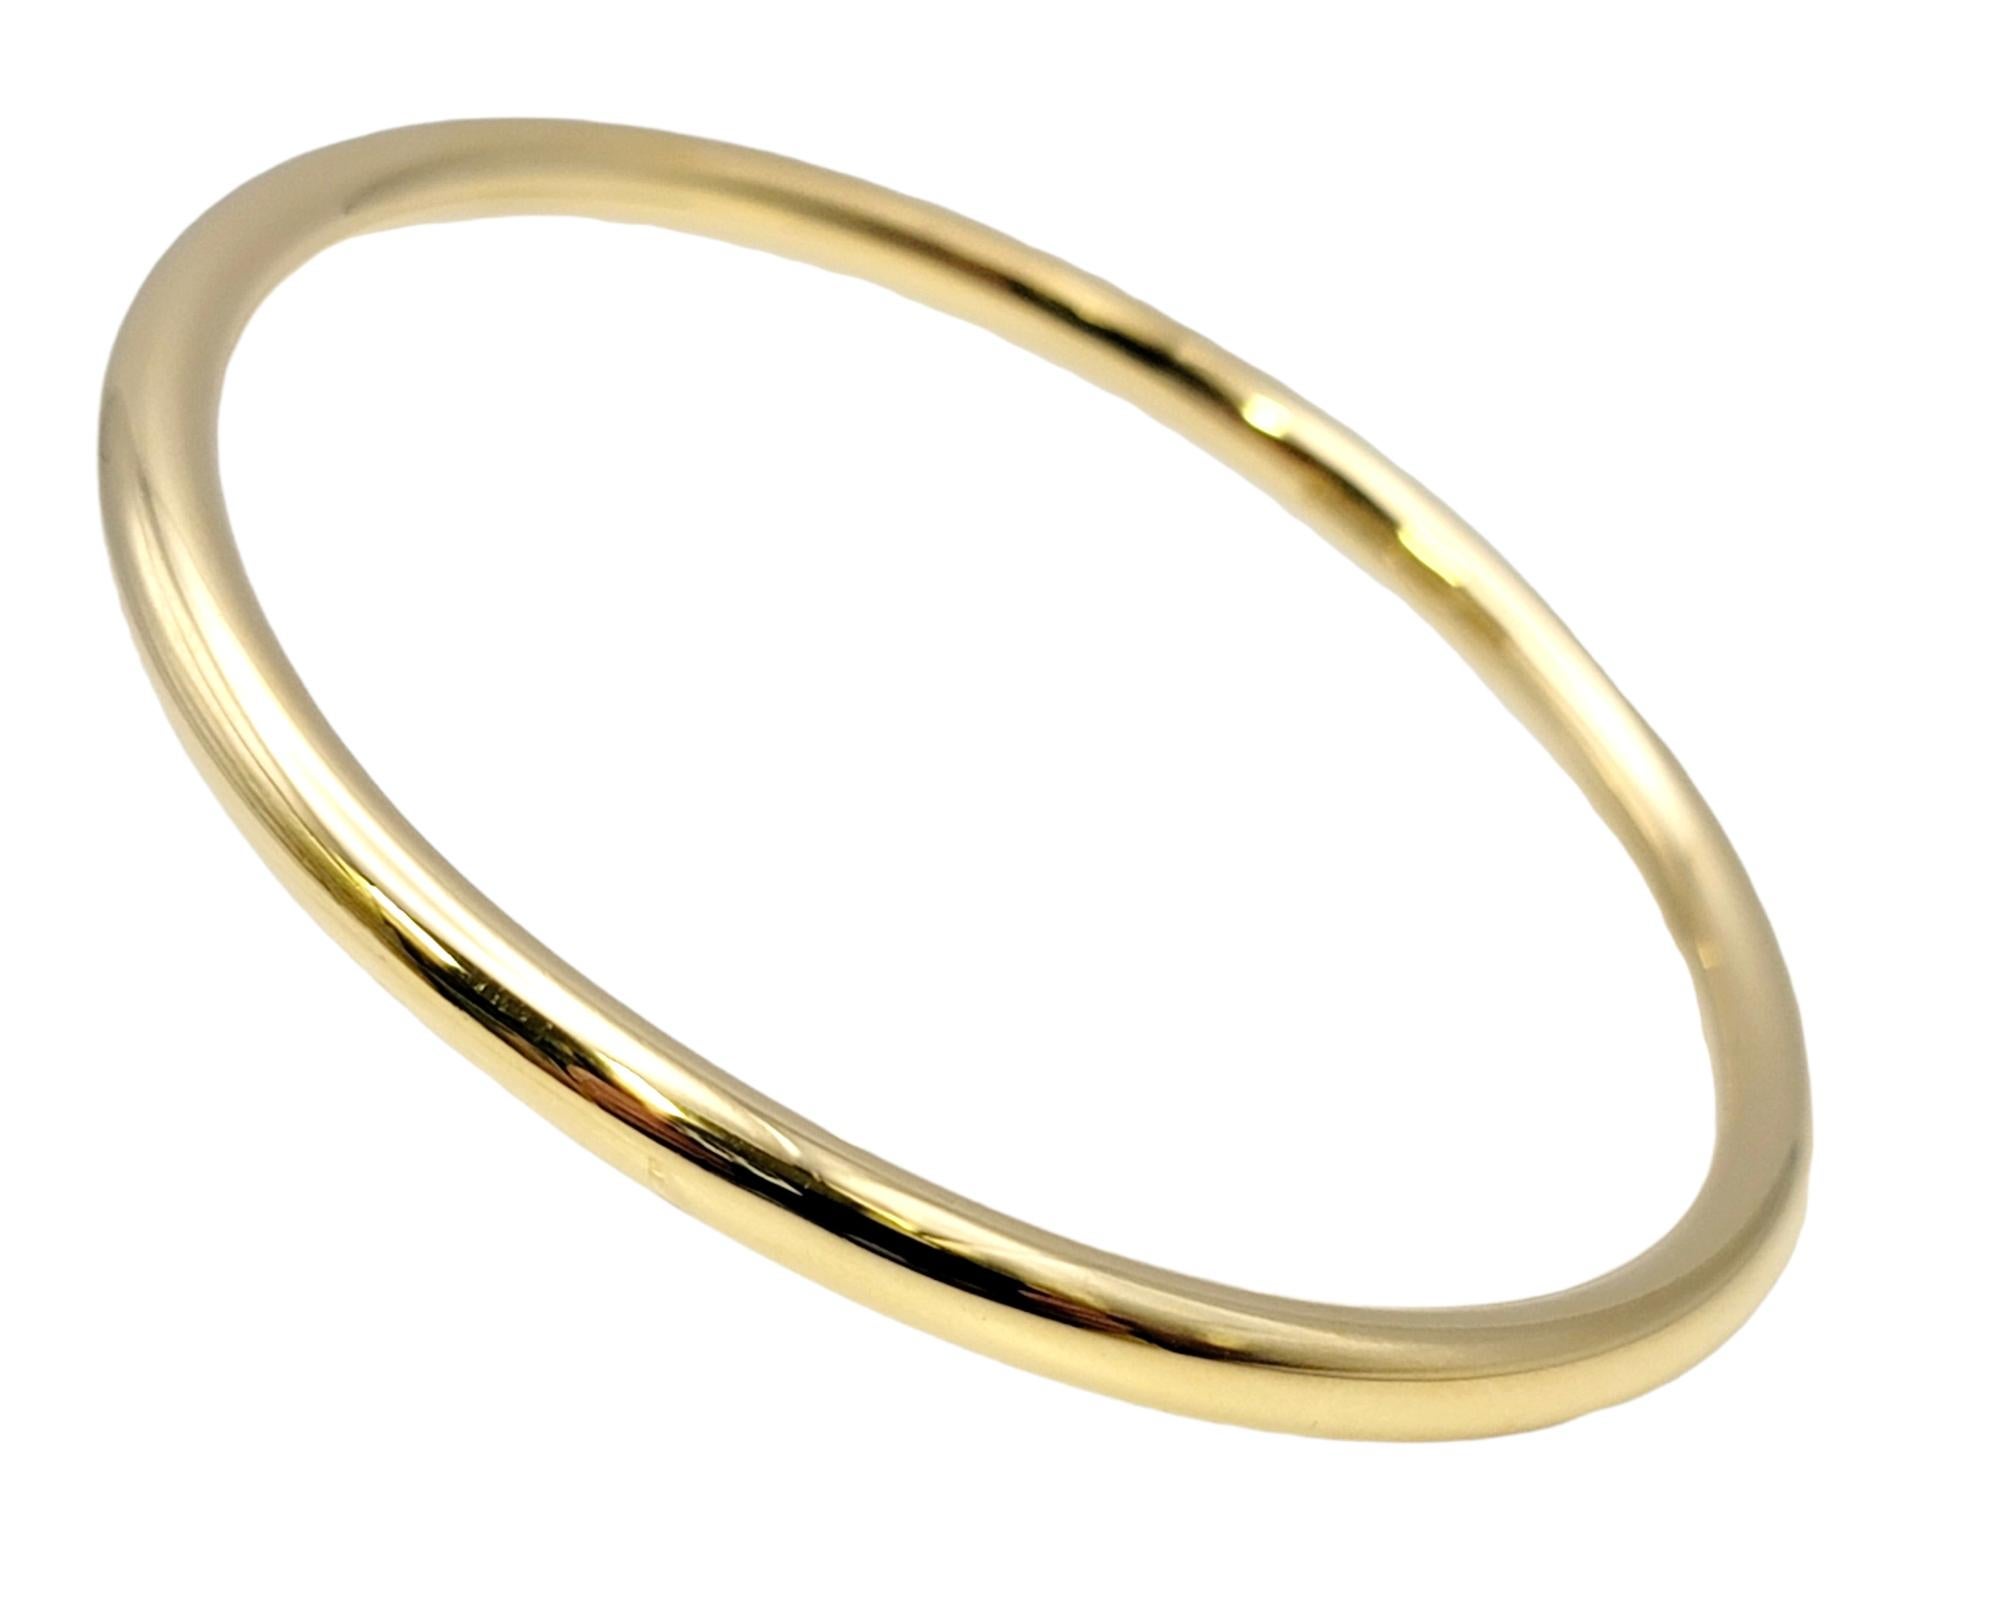 Chic modern bangle bracelet by Tiffany & Co.. This piece is the perfect everyday bracelet and goes with just about everything. Dress it up or down, pair it with other bracelets for a trendy, layered look, or simply wear it on its own for a simple,